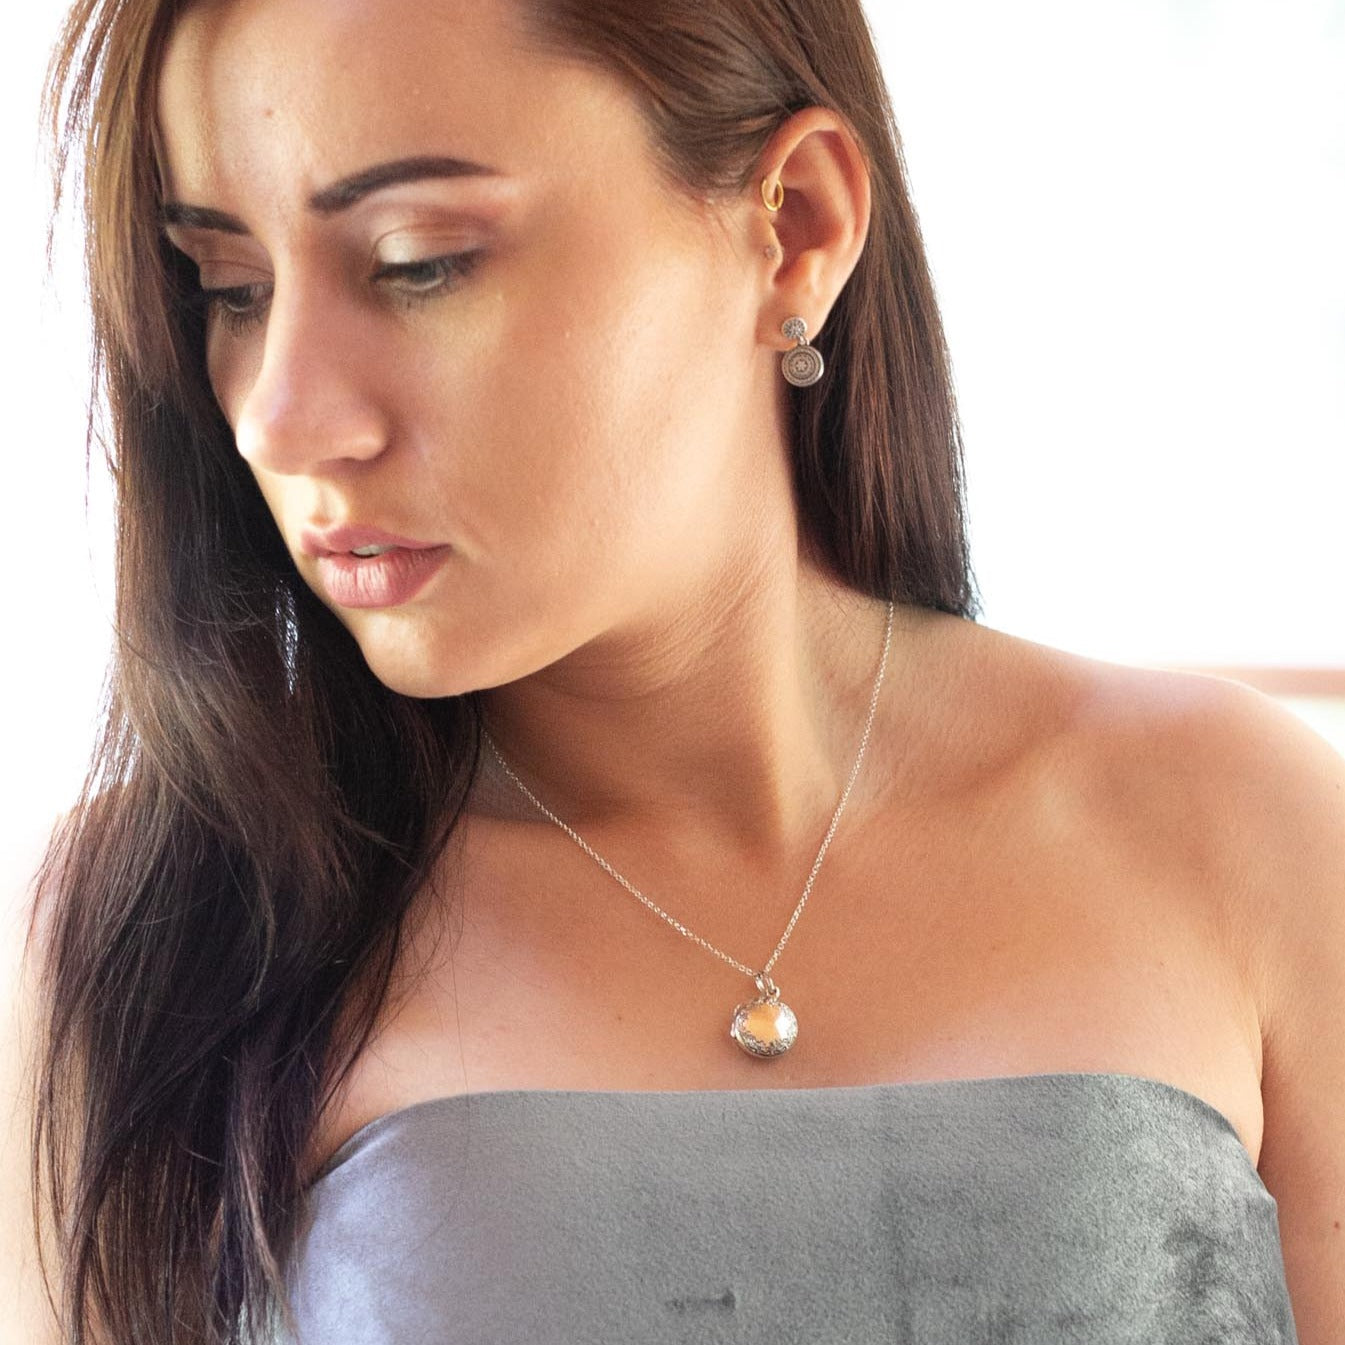 Model wearing grey tube top and round silver photo locket with italian silver chain.